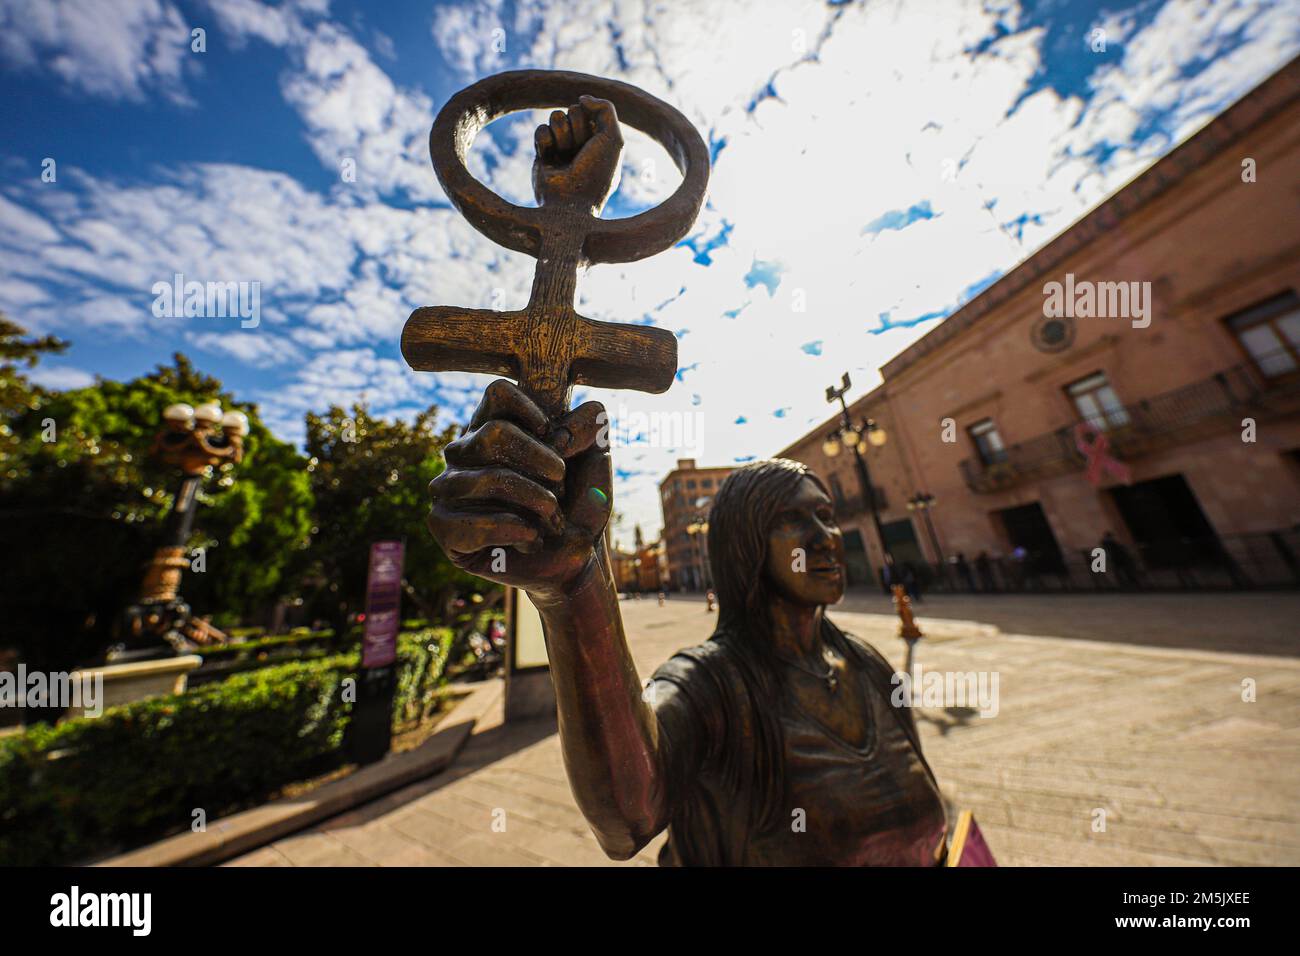 Statue of a woman and the symbol of the feminist movement, lgbt in the square in front of the government palace of San Luis Potosí Mexico. femenicide. San Luis Potosí, It was an important gold and silver mining center on the Camino Real de Tierra Adentro, a commercial route from the mid-16th century to the 19th century colonial buildings, such as the imposing Baroque-era Temple of San Francisco, which dominates the leafy Garden of San Francisco. Nearby is the Templo del Carmen, dating from the 18th century.  (photo By Luis GutierrezNortePhoto)    Estatua de mujer y el simbolo del movimiento f Stock Photo